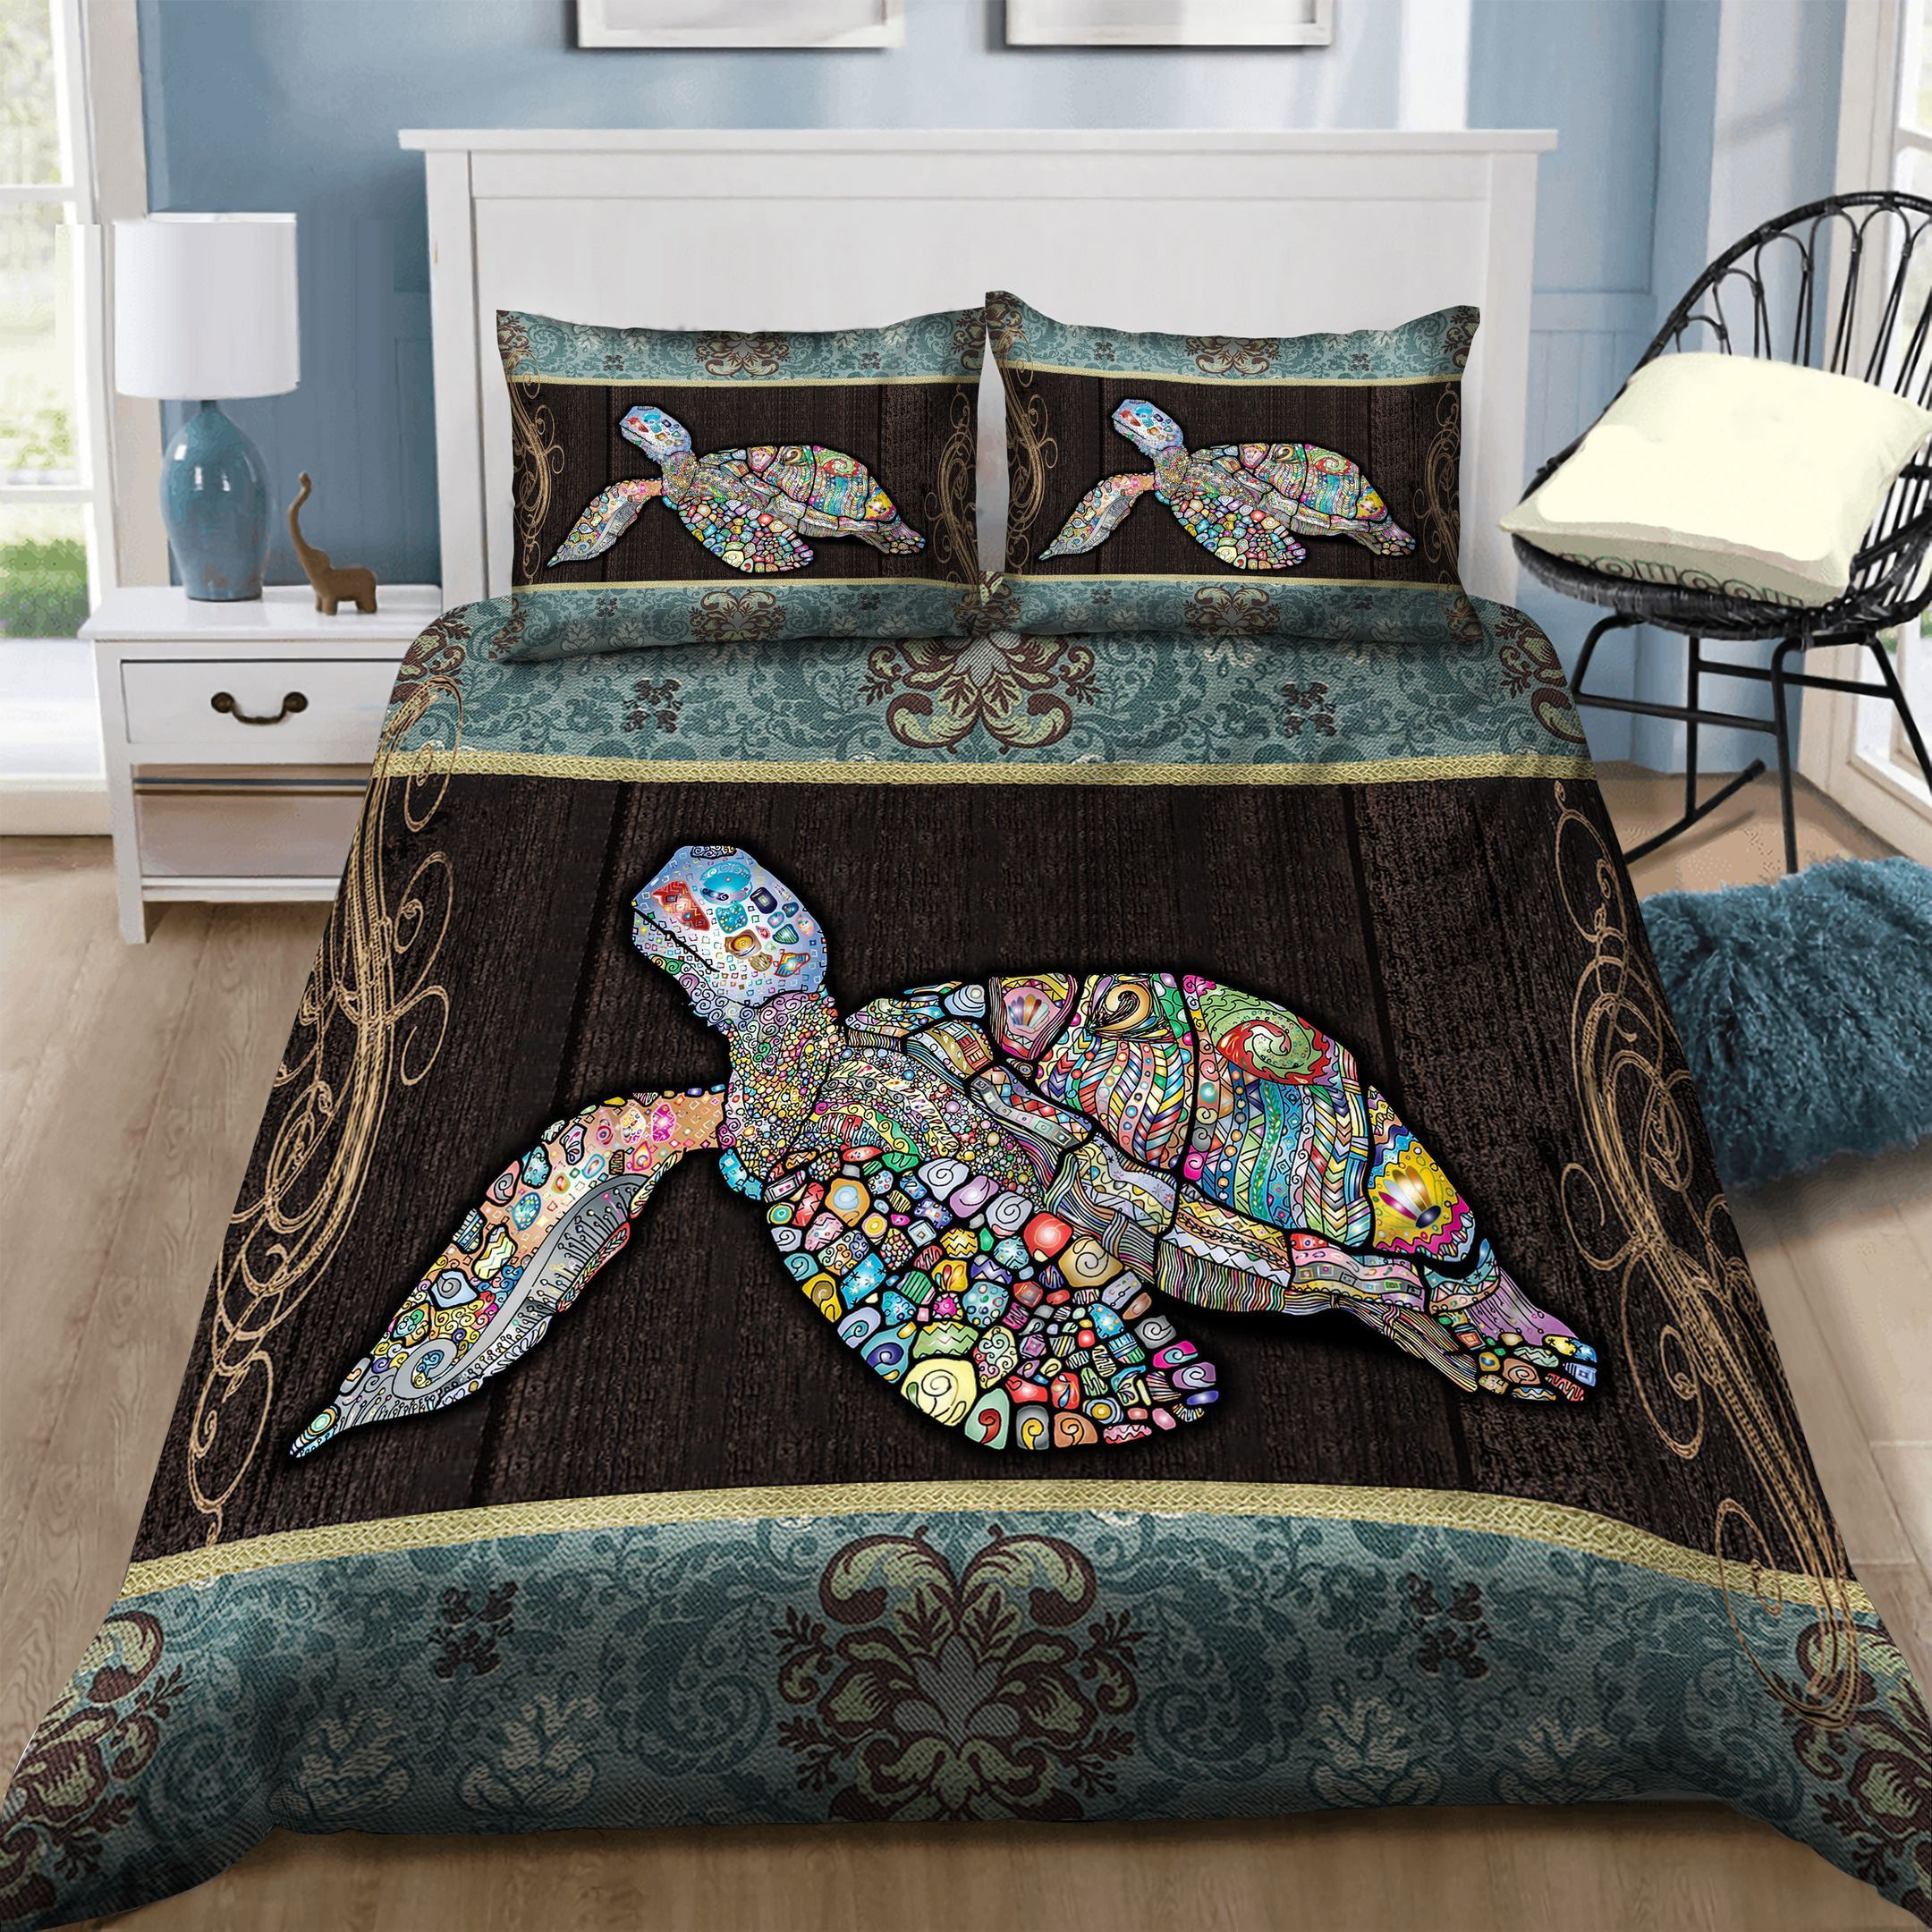 vibrant turtle bedding set with colorful sheets and duvet cover perfect presents for birthdays christmas and thanksgiving osq57